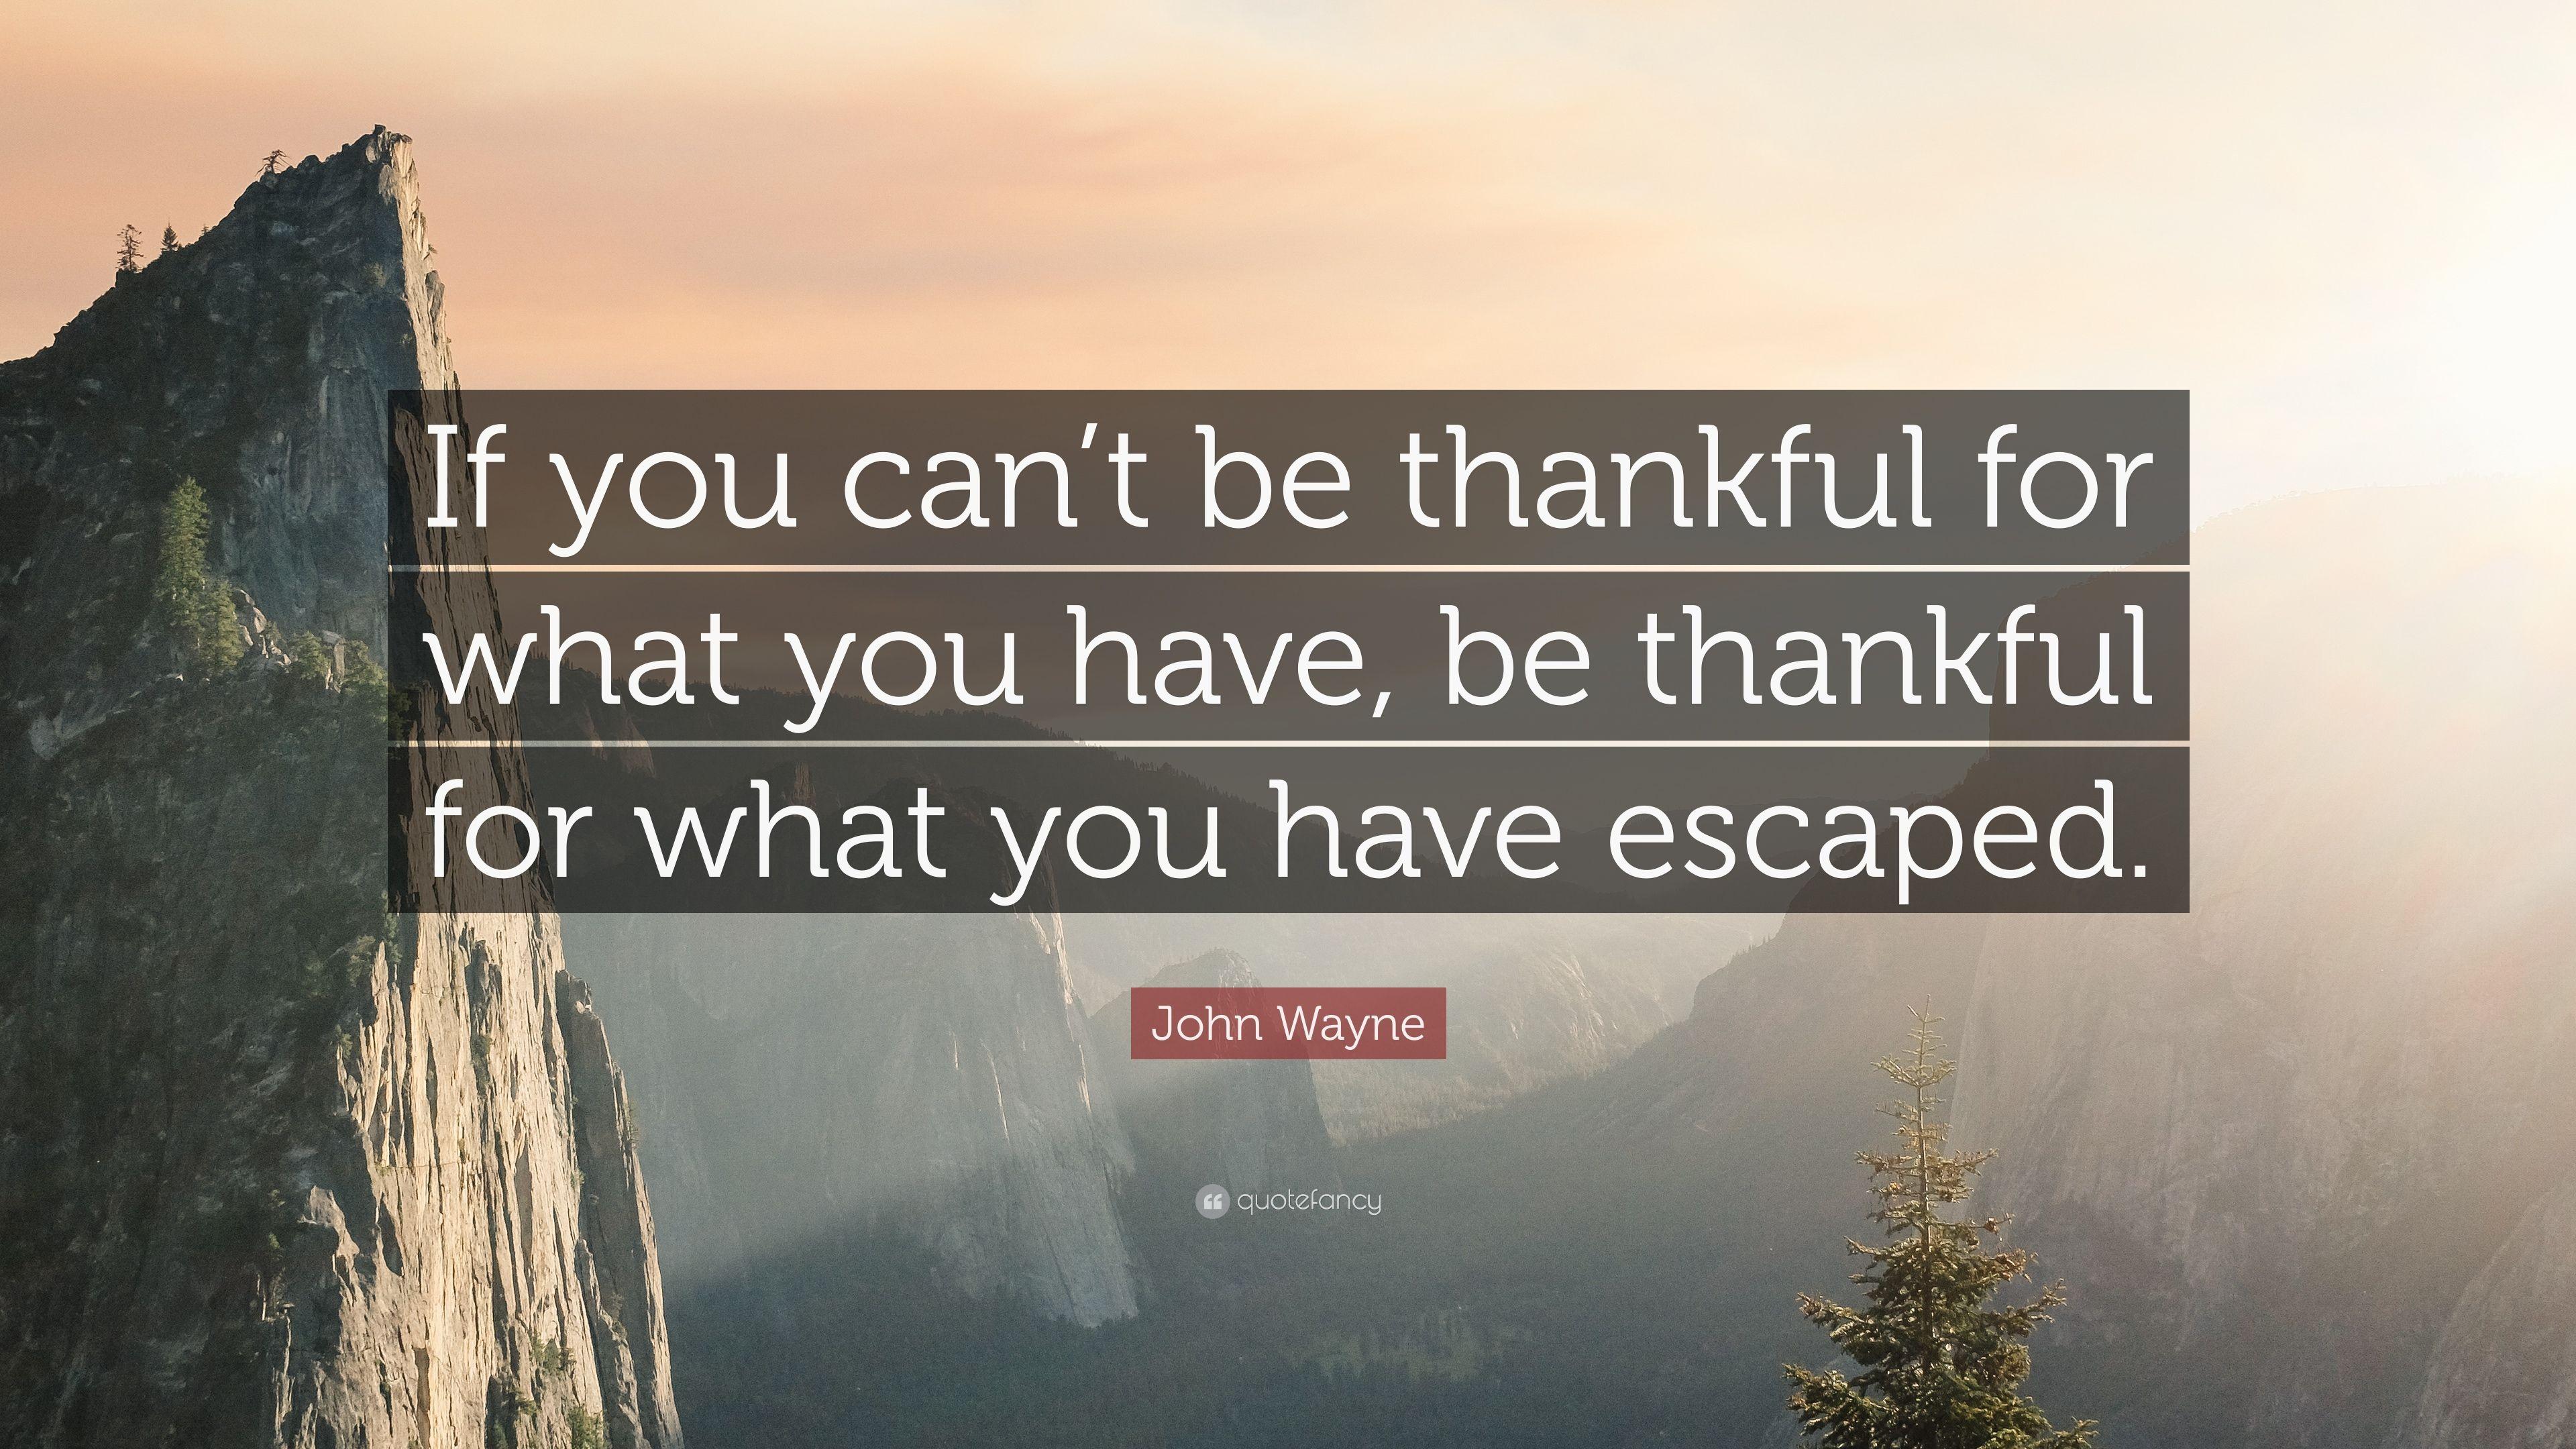 John Wayne Quote: “If you can't be thankful for what you have, be